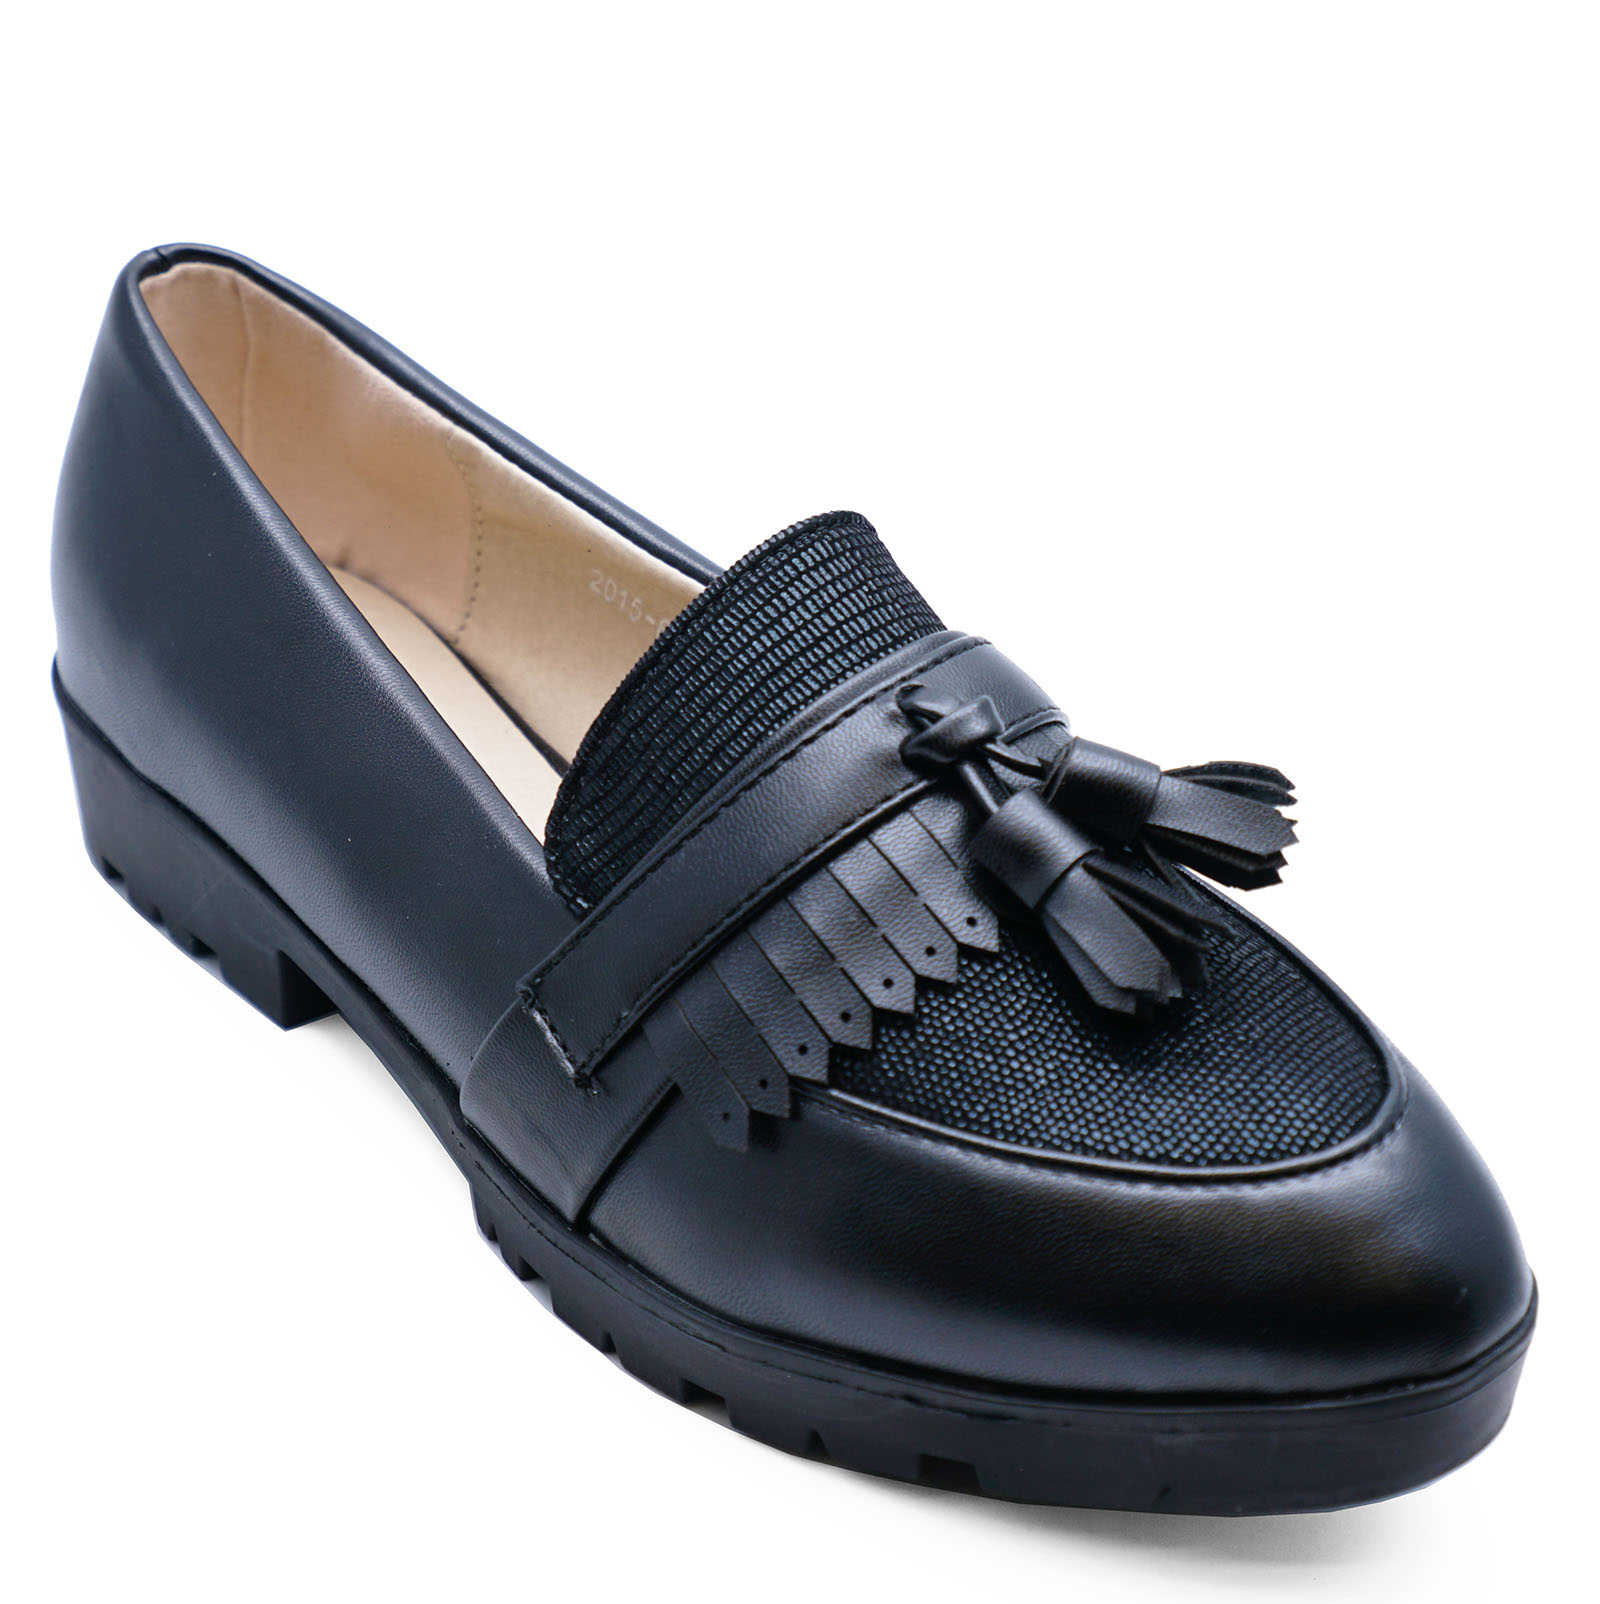 LADIES BLACK TASSLE LOAFERS SLIP-ON CLEATED FLAT SMART COMFY WORK SHOES ...